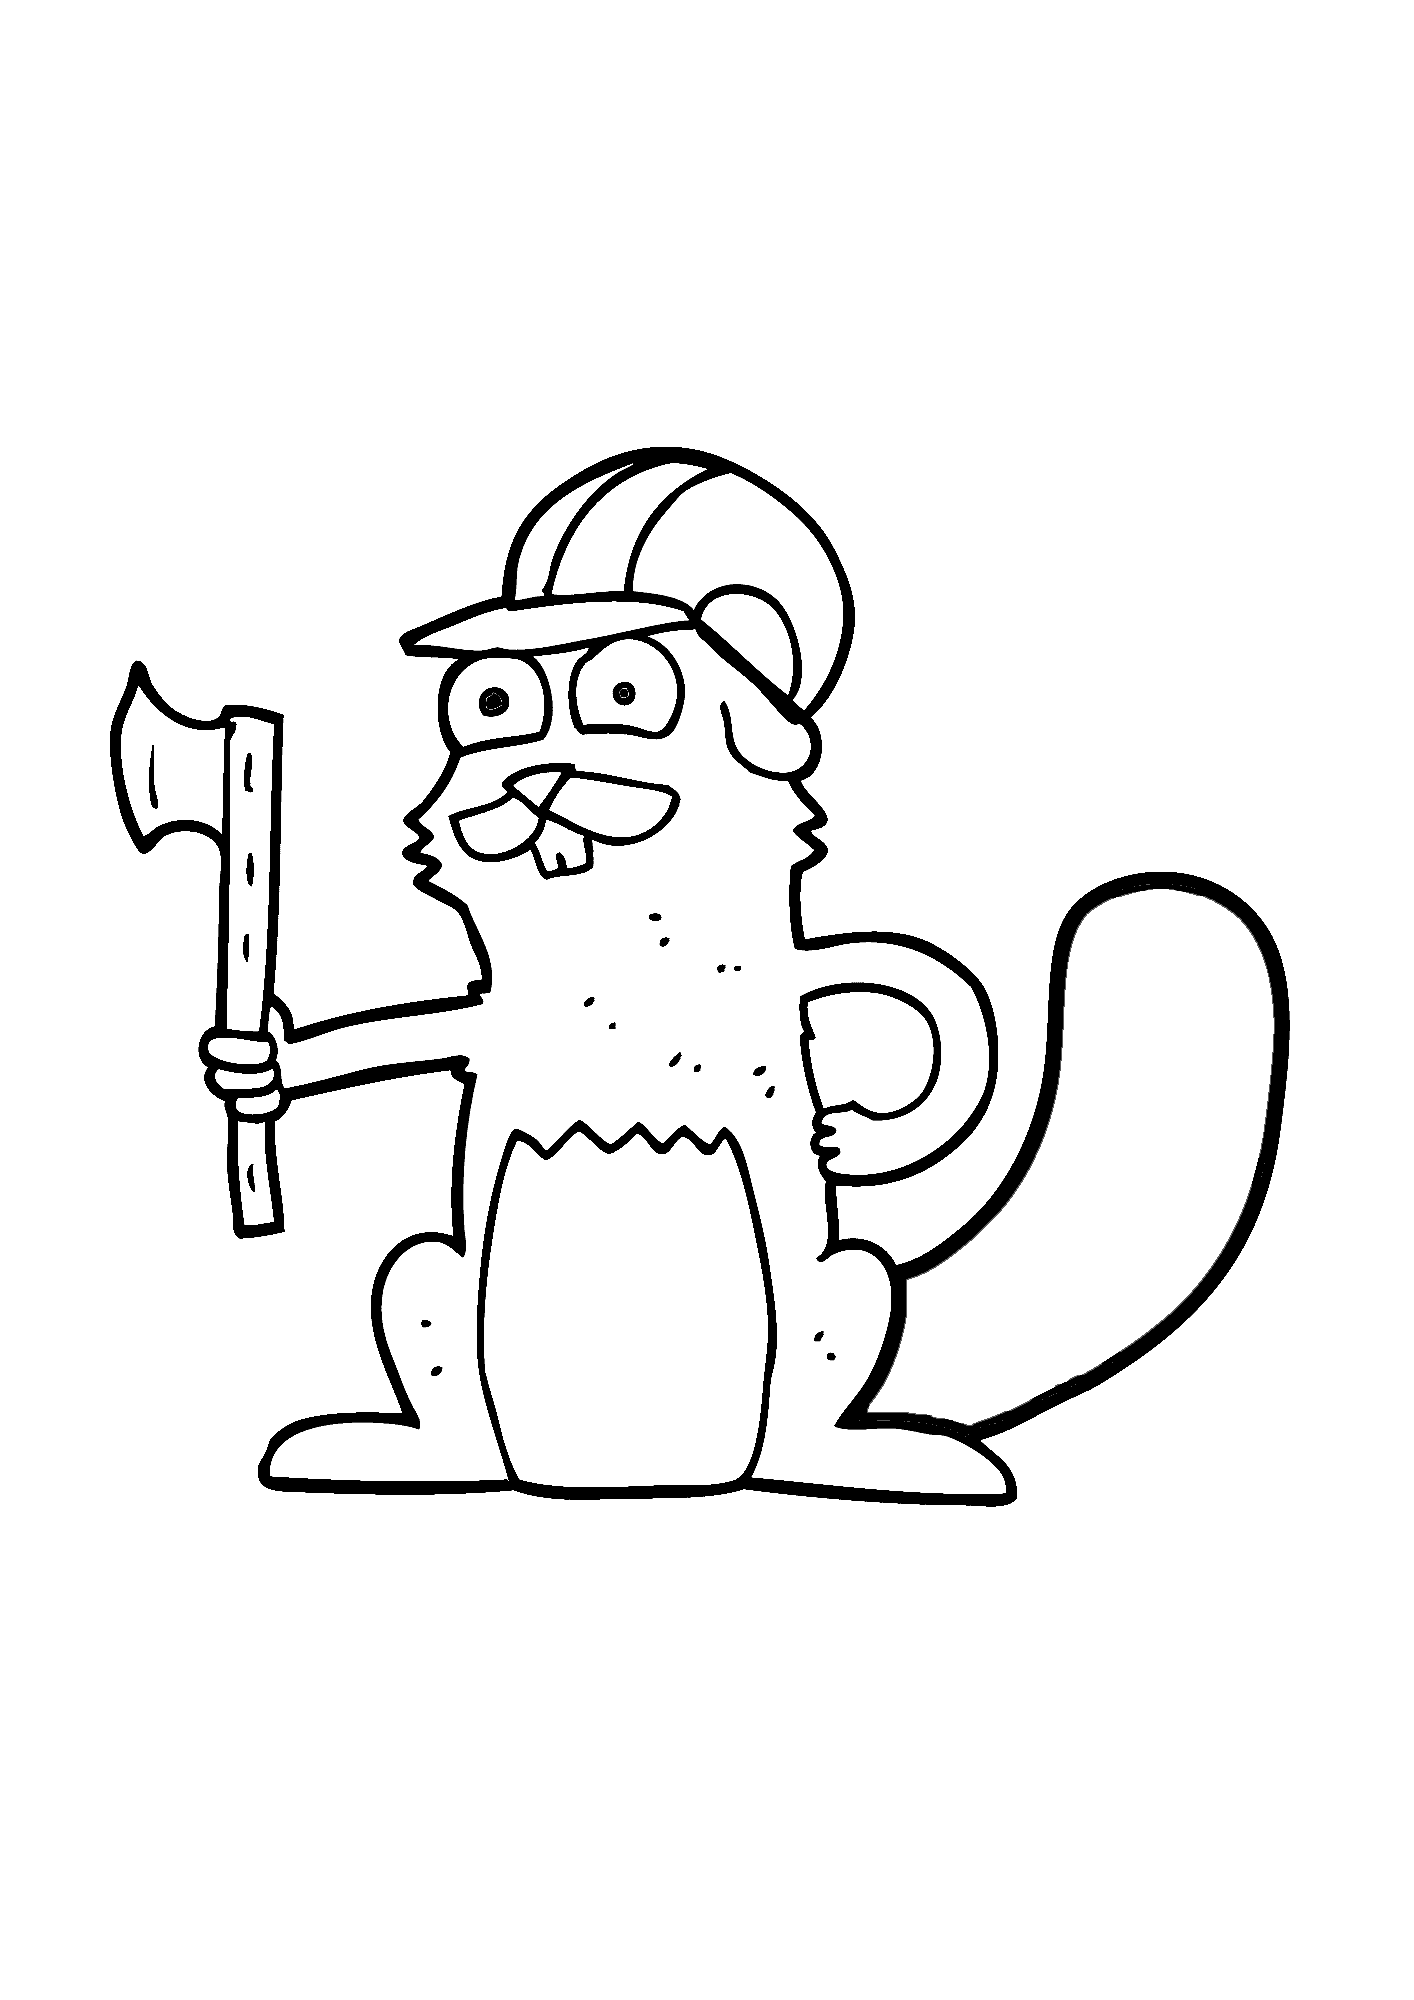 Sticker Of A Cartoon Beaver Coloring Page